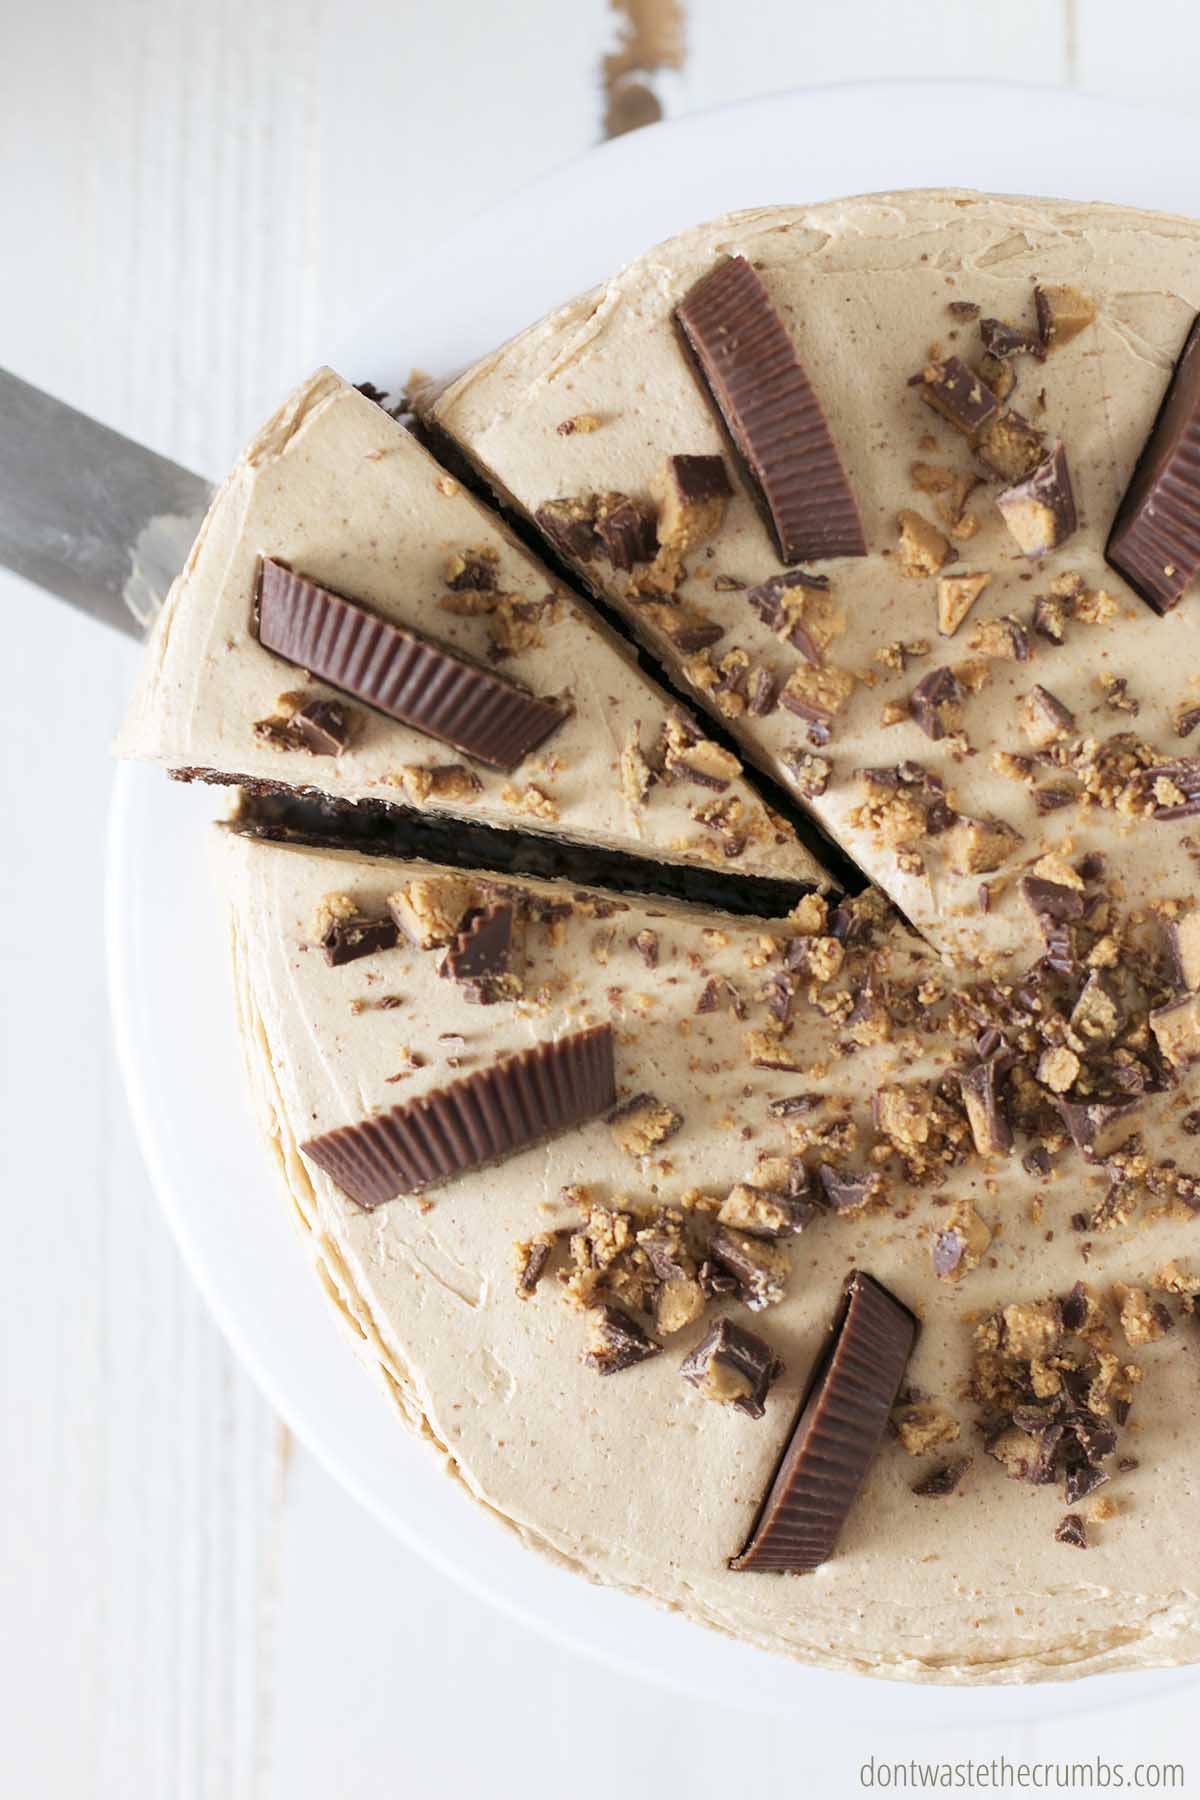 A wedge of chocolate peanut butter cake, topped with chopped peanut butter cups is being served.